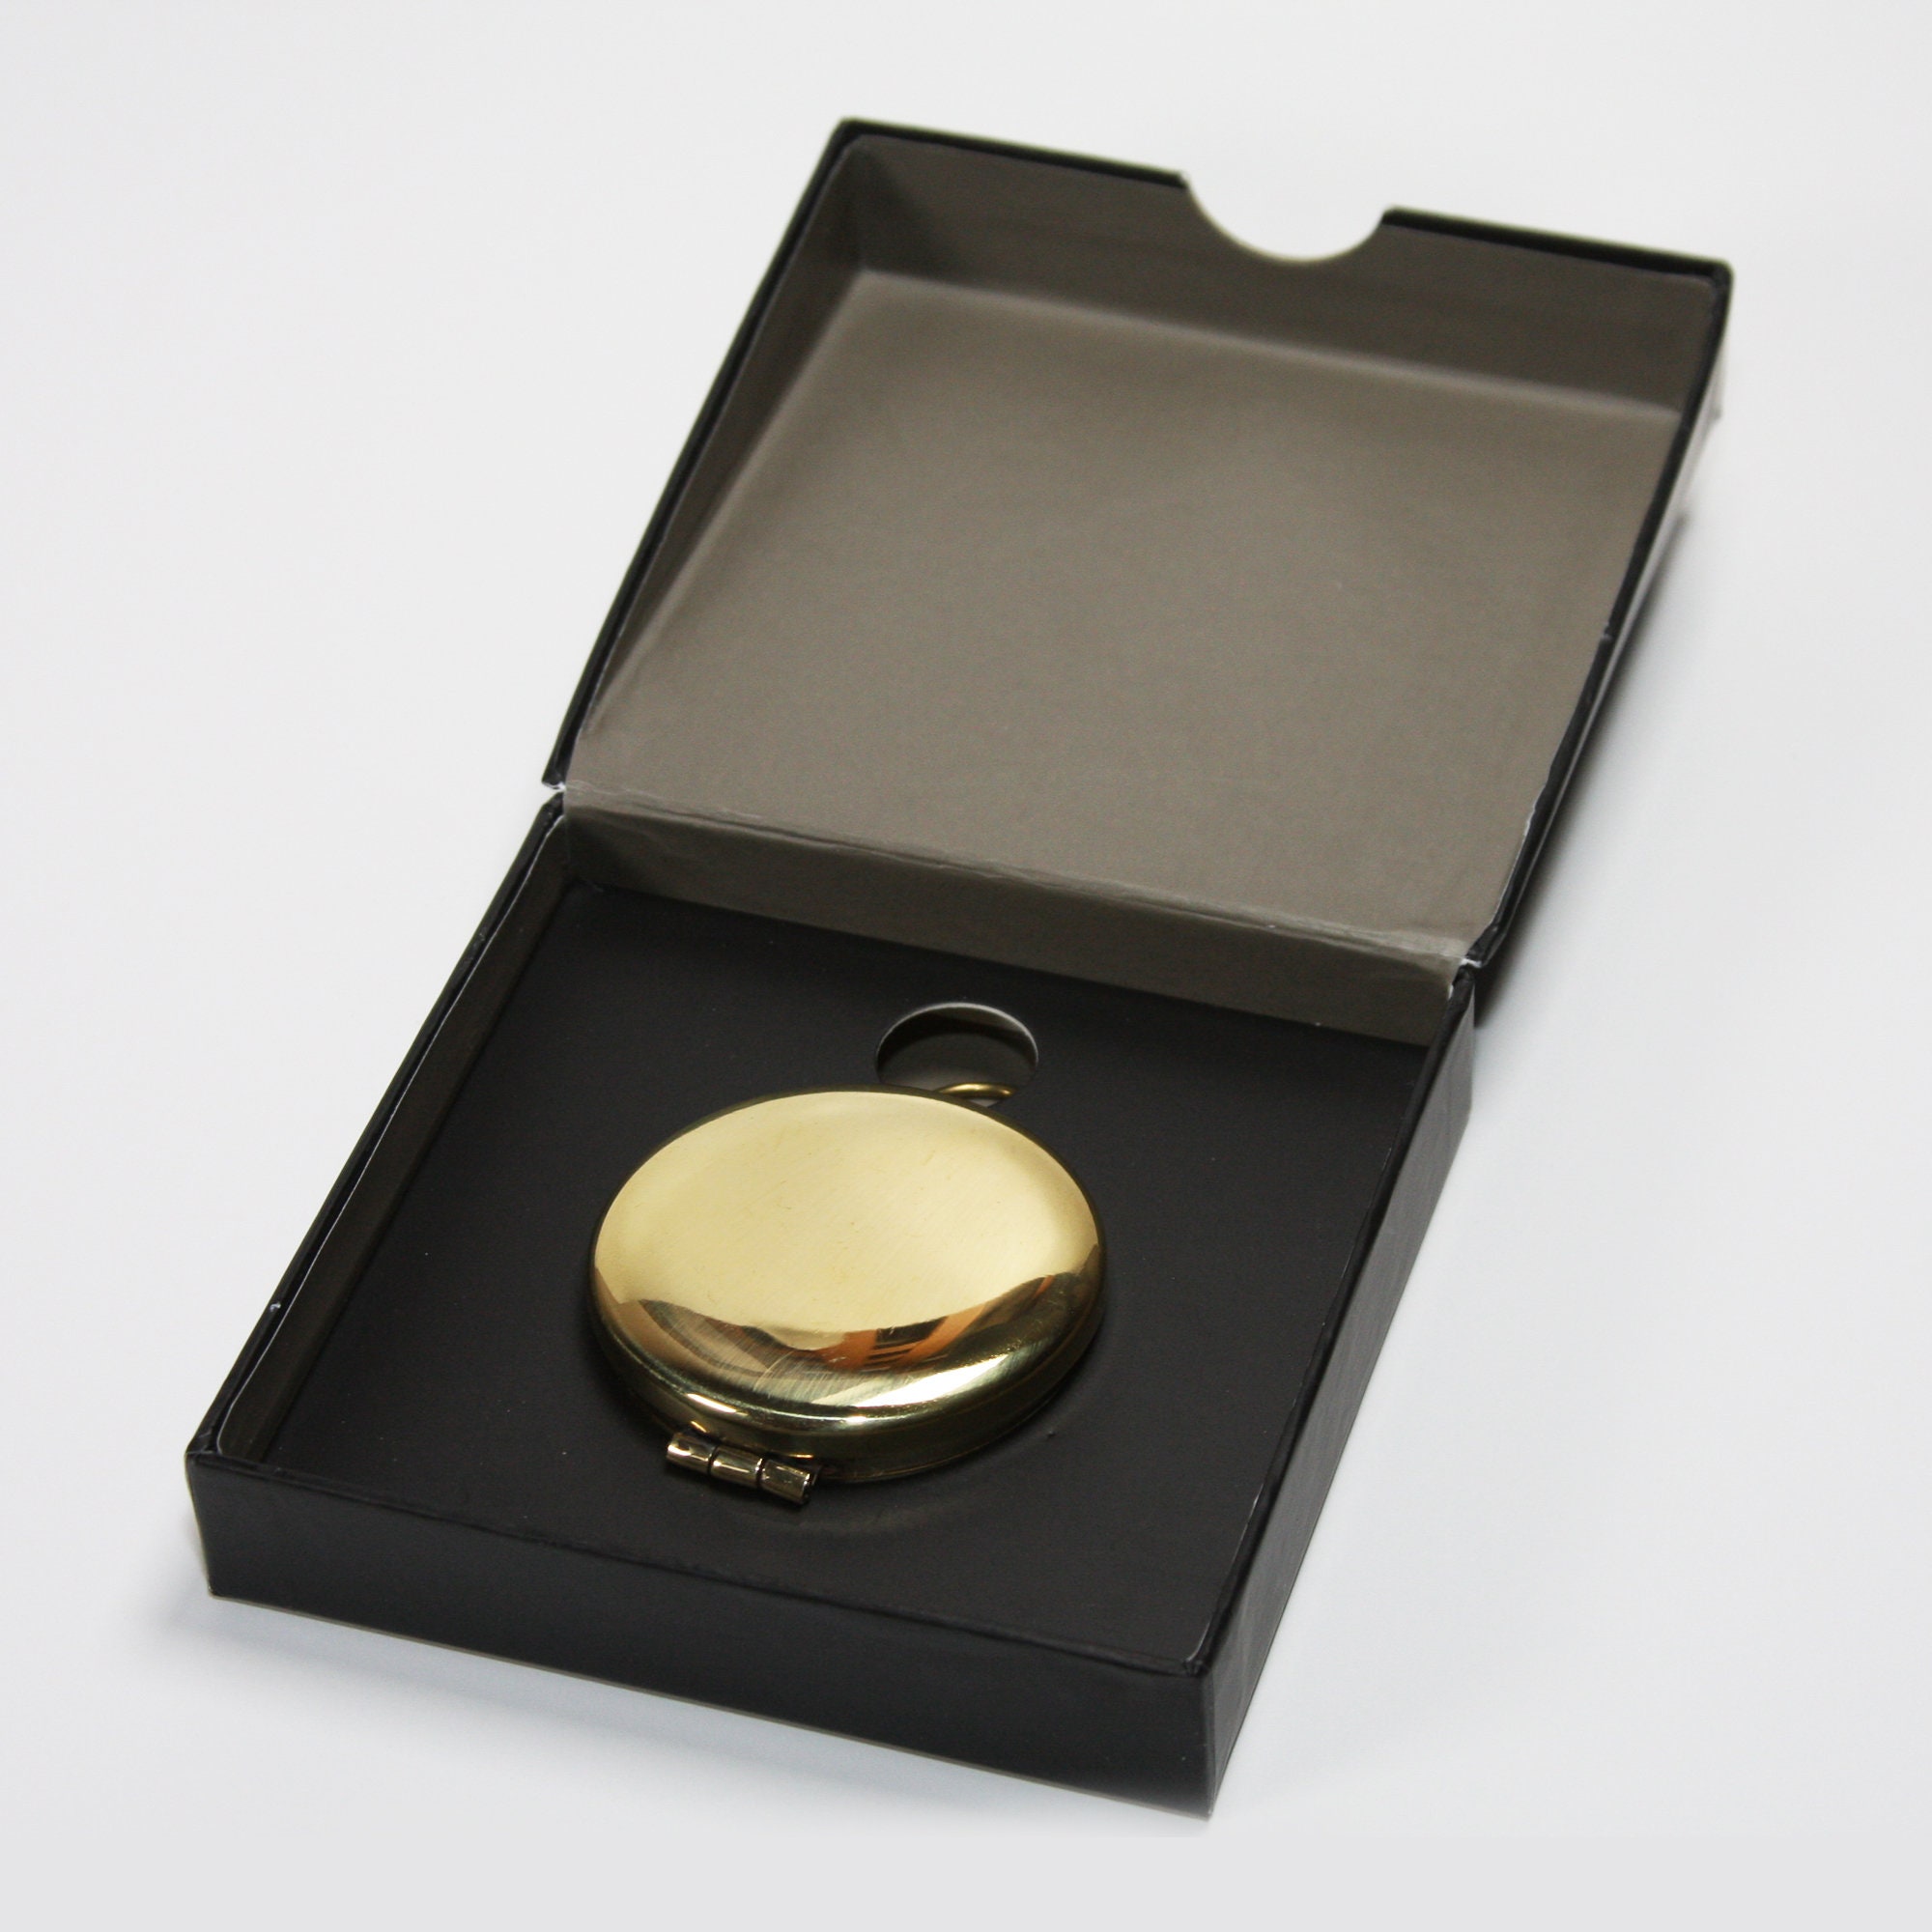 Details about   SOLID BRASS NAUTICAL MILITARY POCKET COMPASS MARINE REPLICA DESIGN GIFT ITEM. 